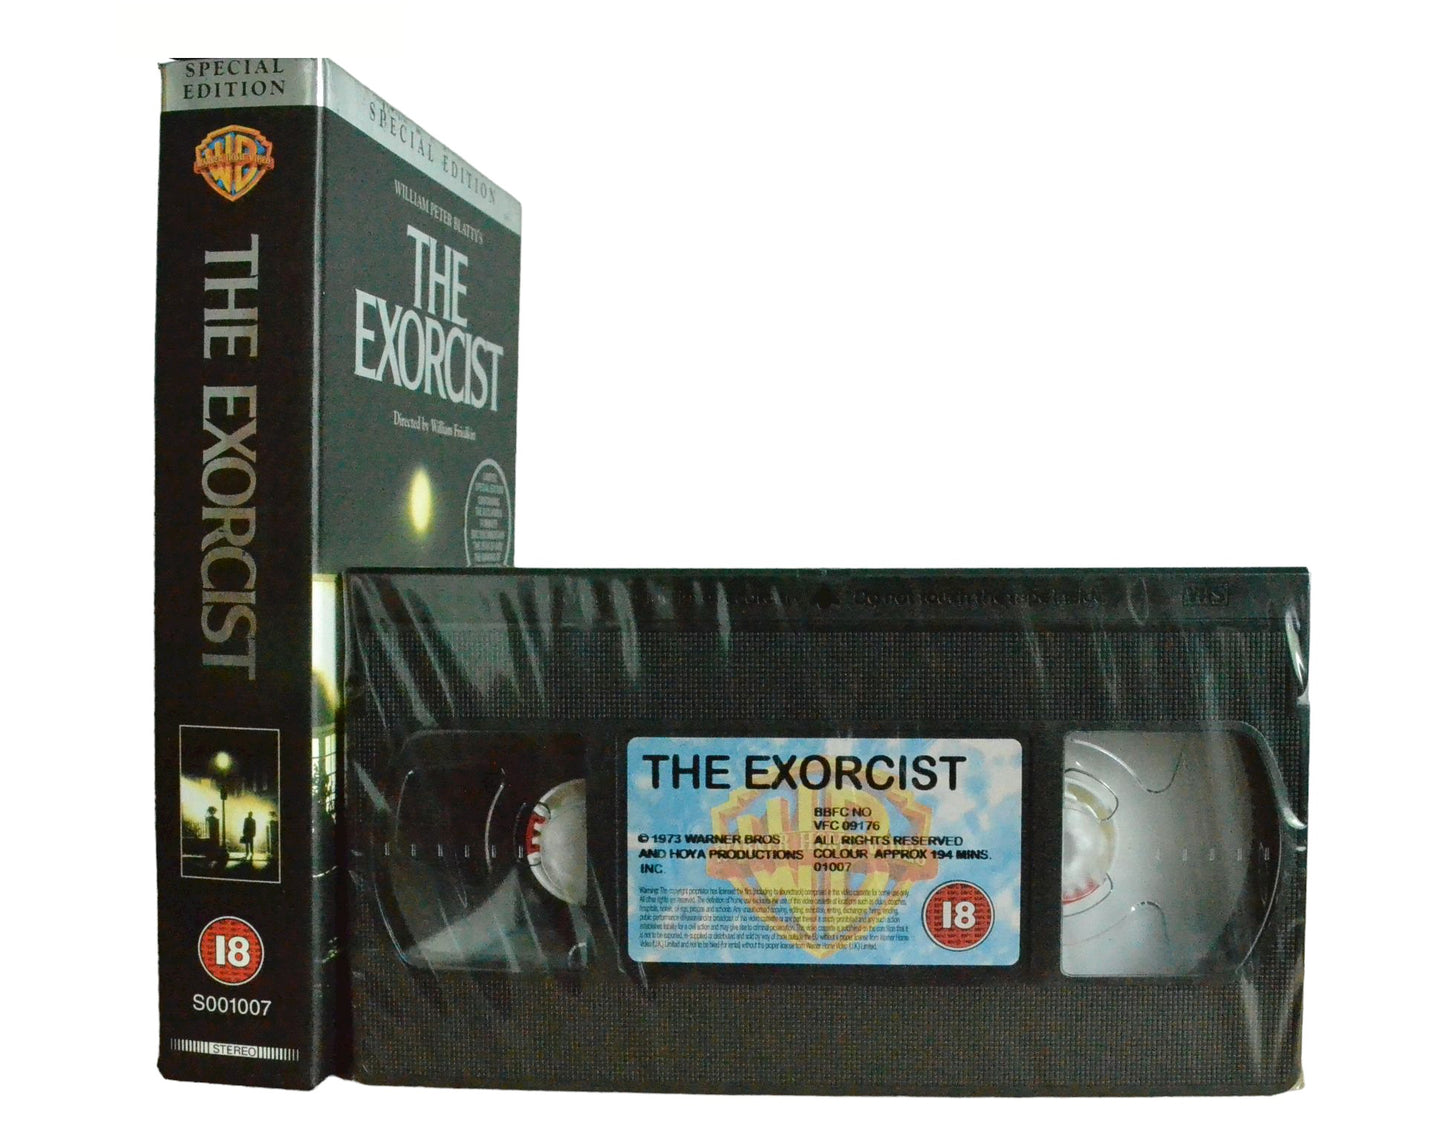 The Exorcist (Special Edition) - Jack MacGowran - Warner Home Video - Brand New Sealed - Pal VHS-